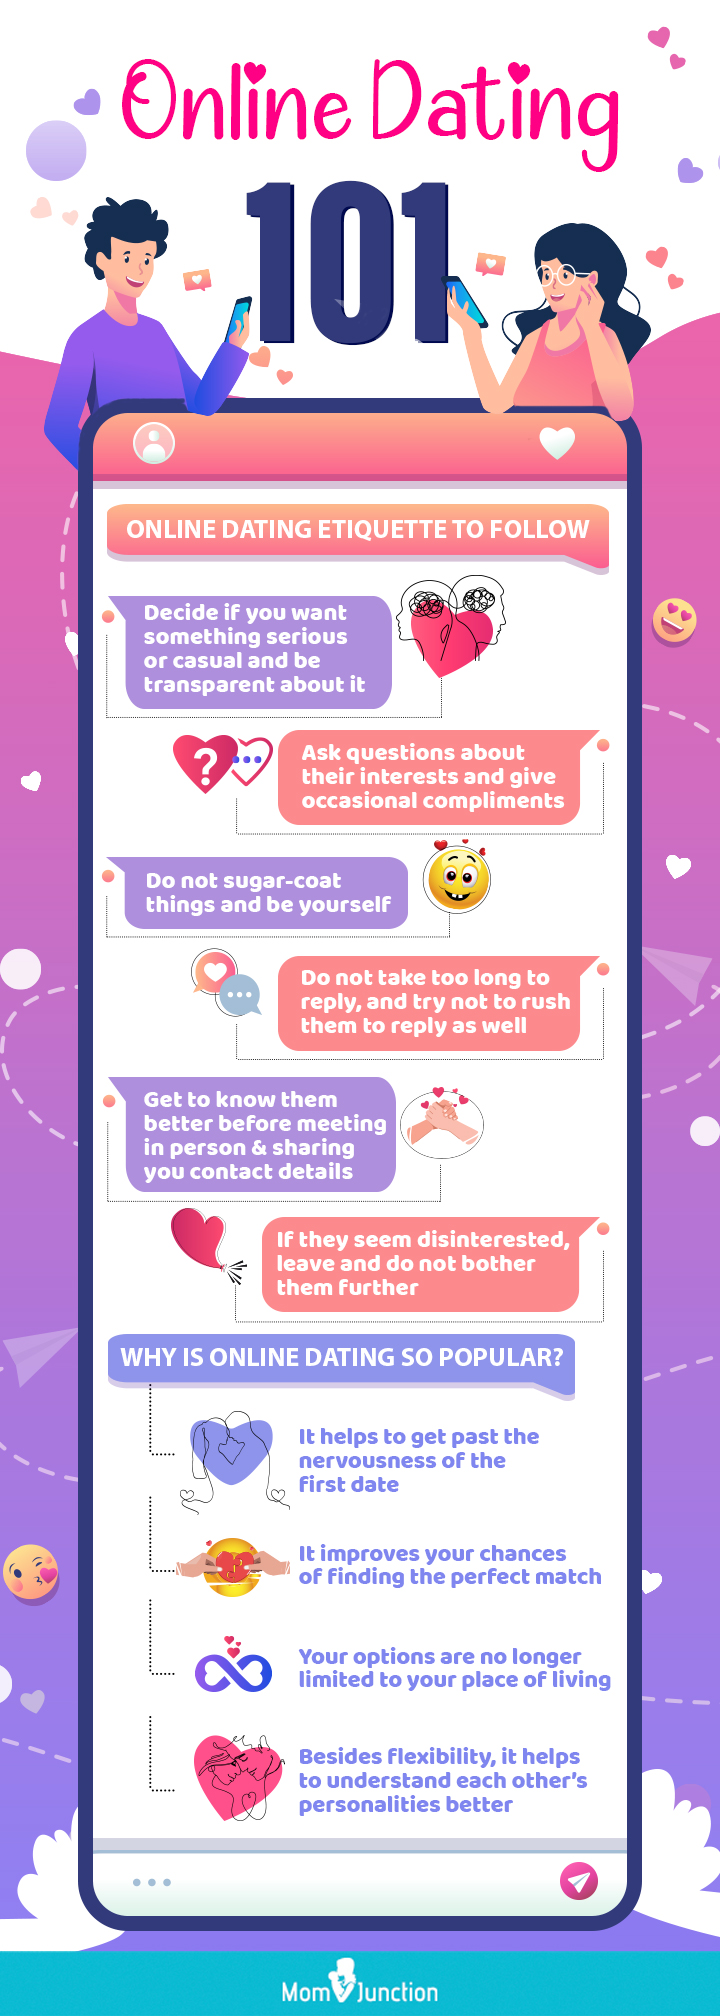 online dating etiquette to follow [infographic]